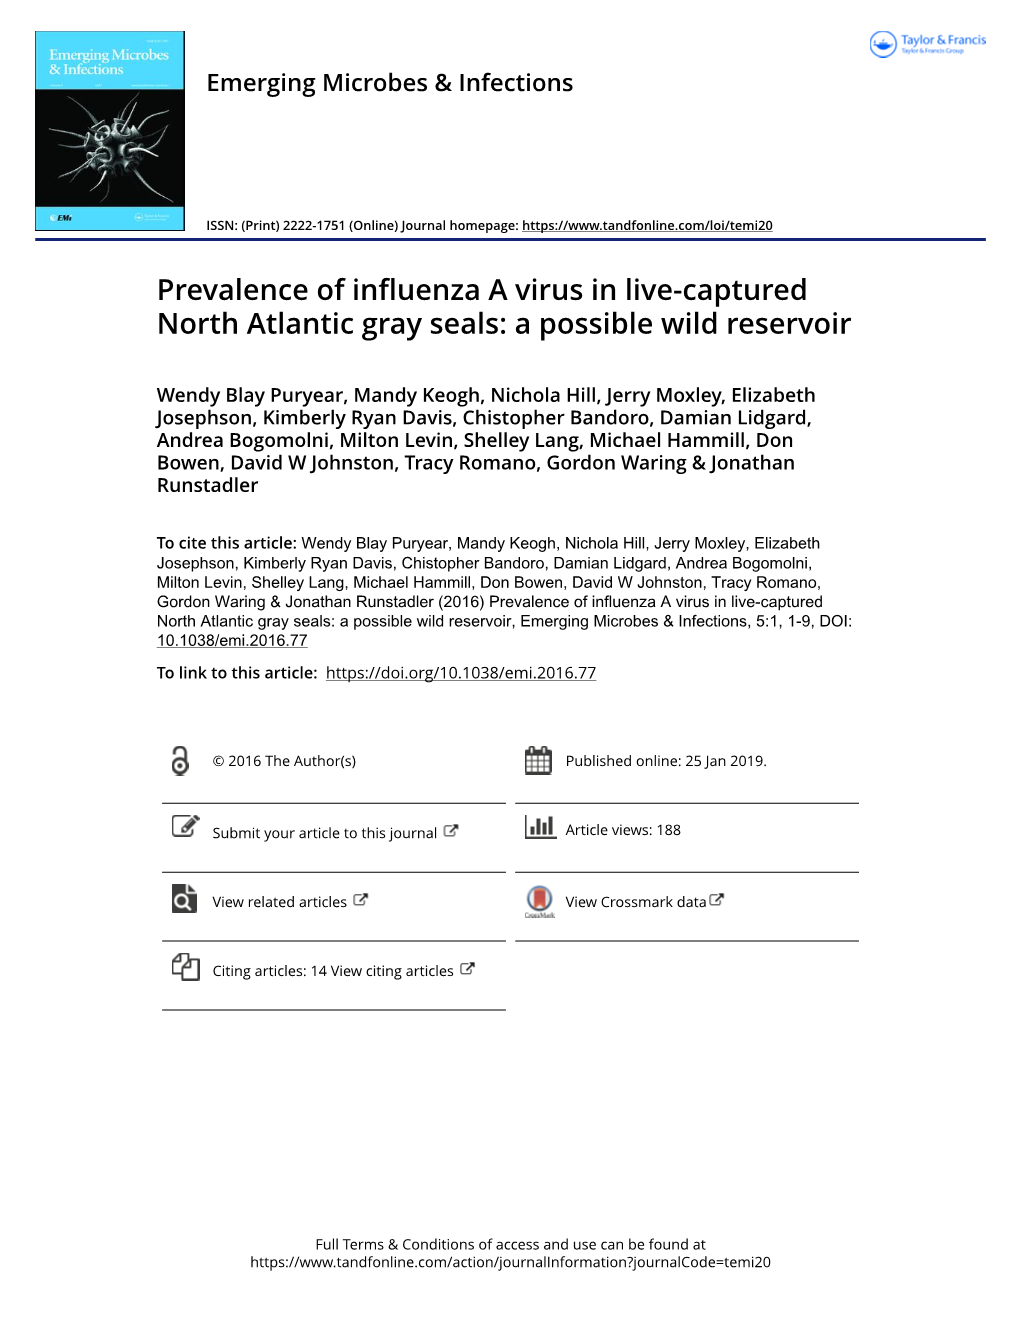 Prevalence of Influenza a Virus in Live-Captured North Atlantic Gray Seals: a Possible Wild Reservoir